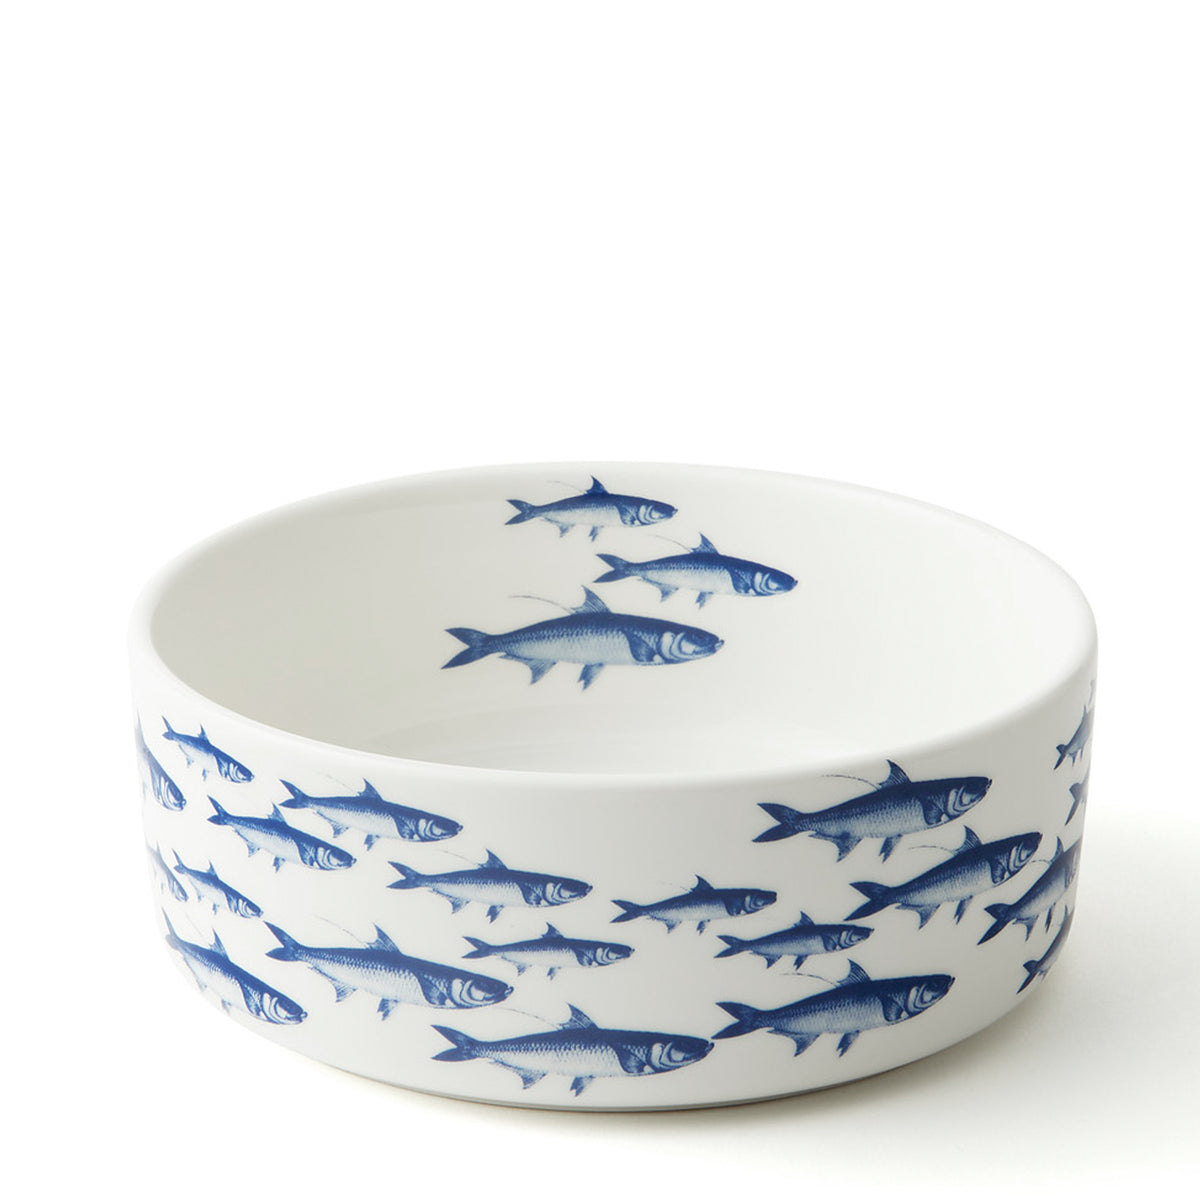 School of Fish Large Pet Bowls in blue and white porcelain from Caskata